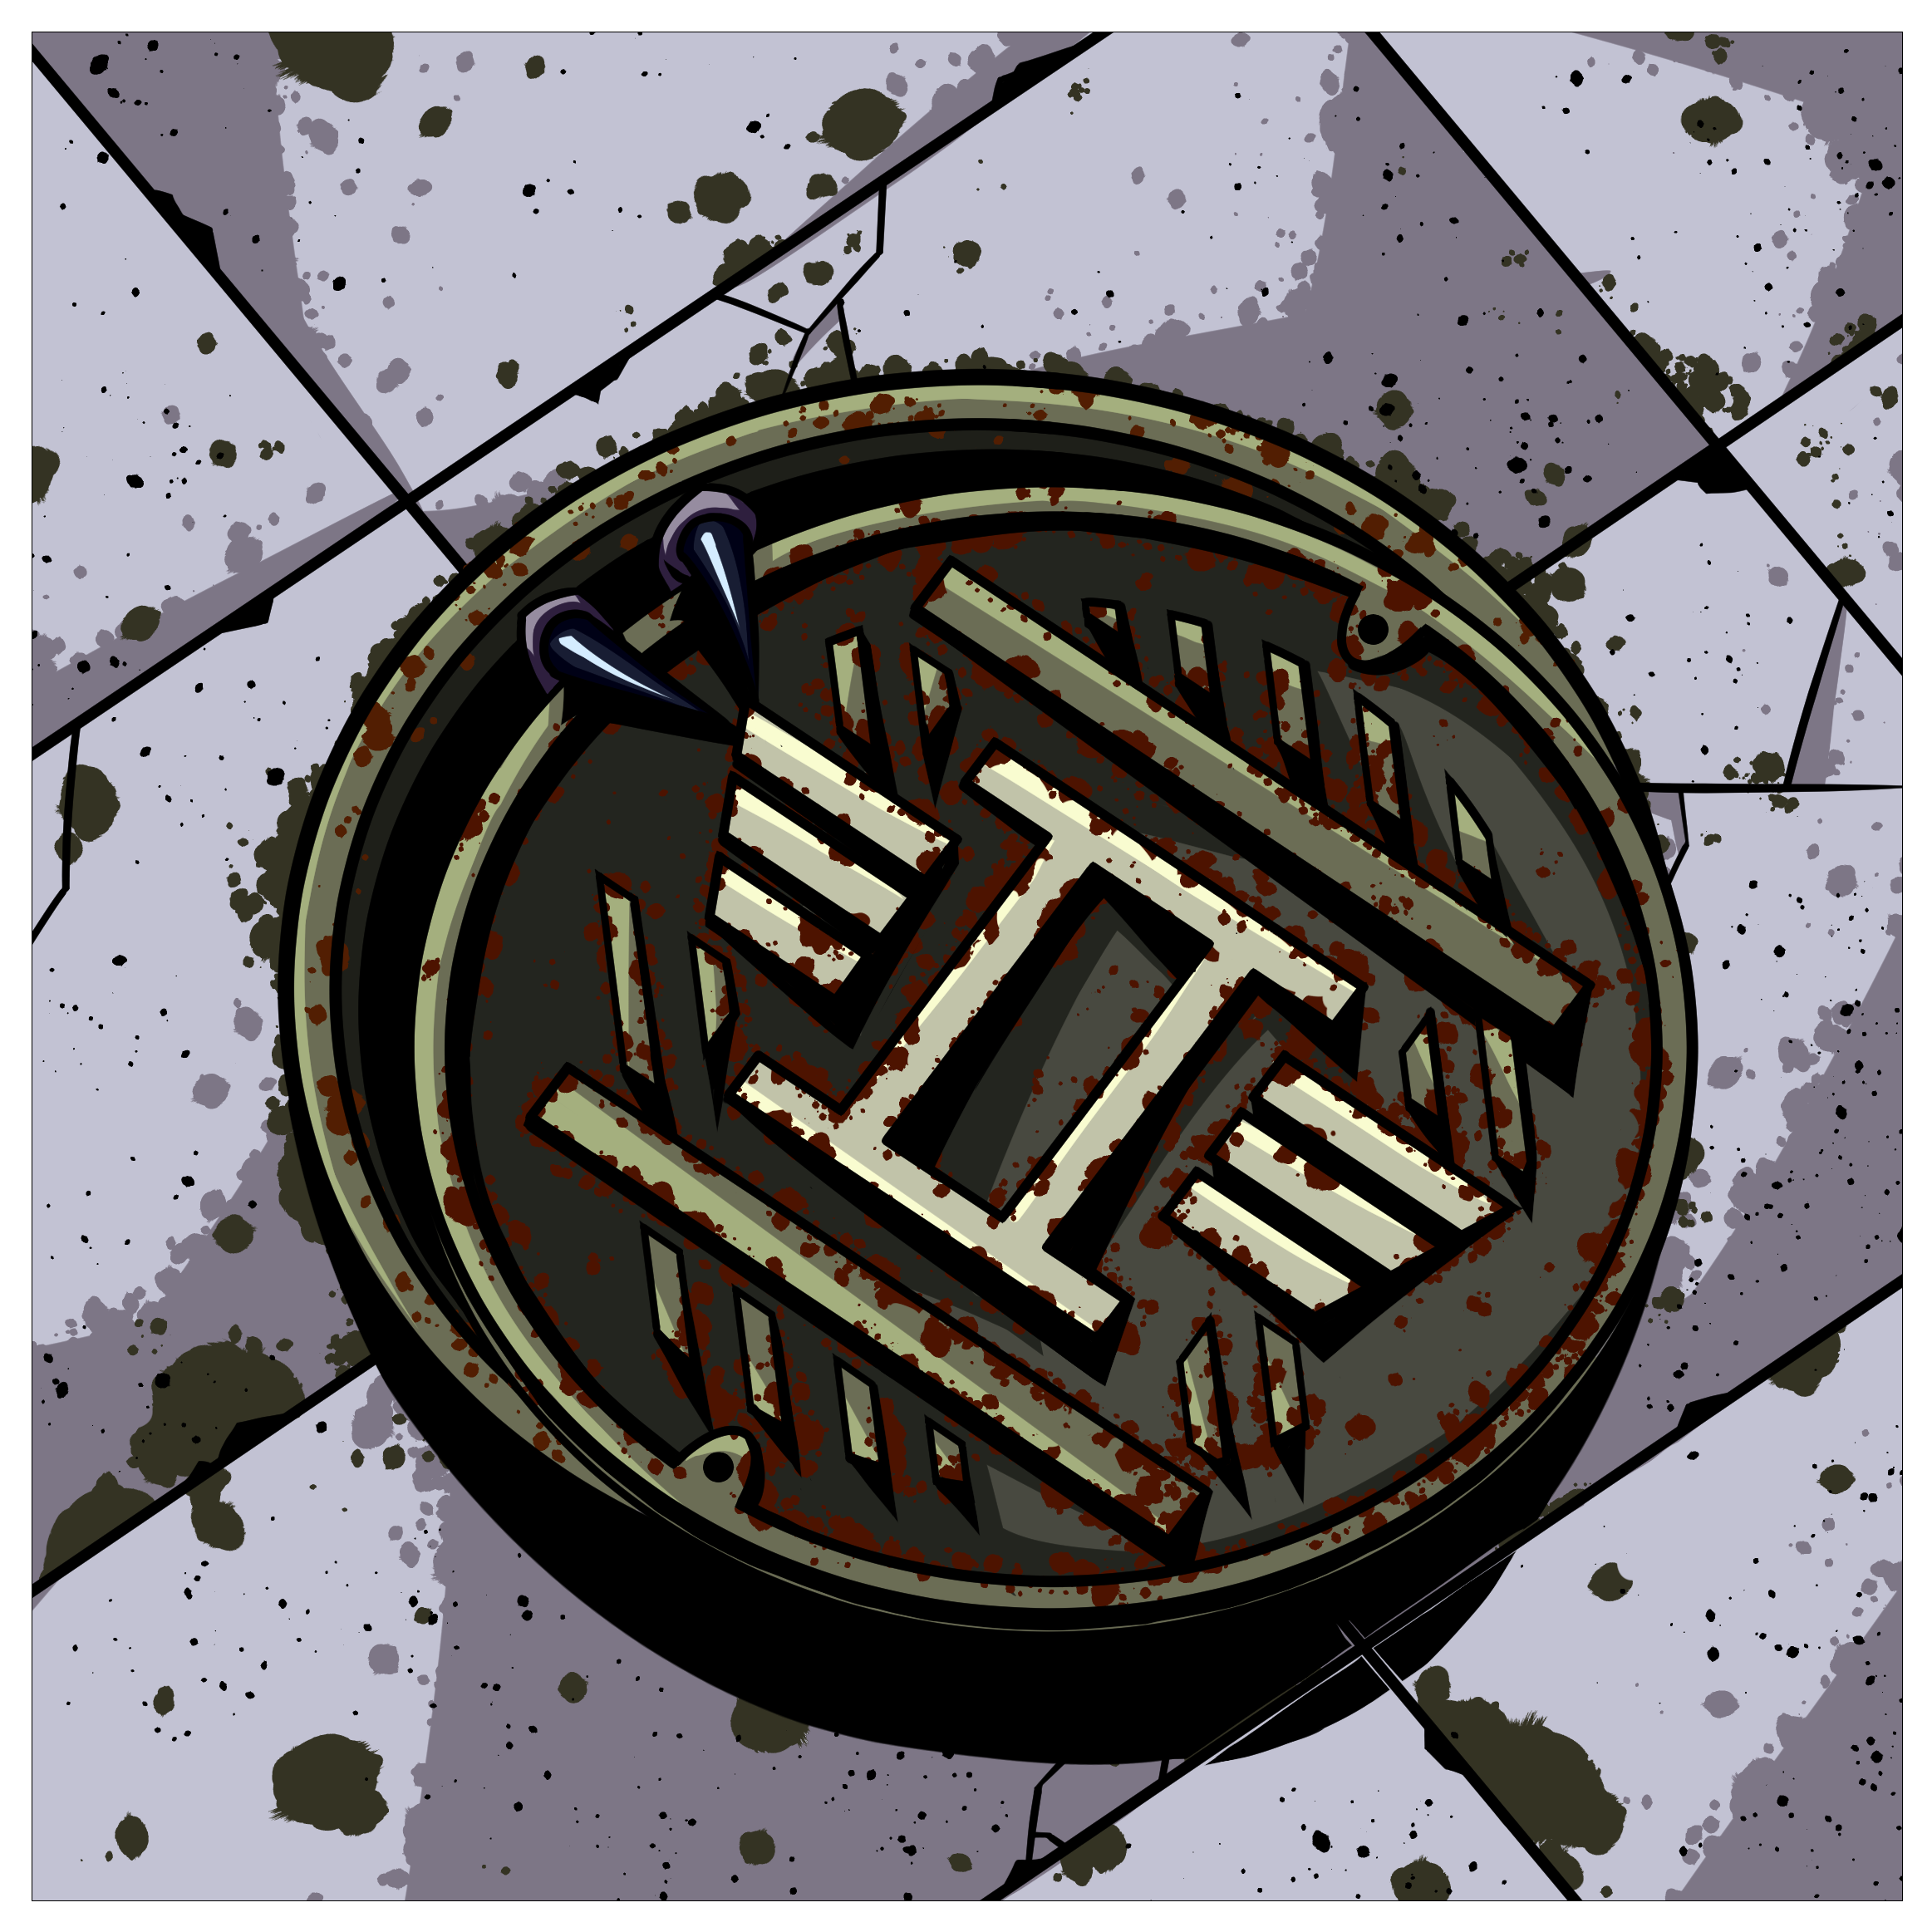 Objective II: Thing in the Sewer